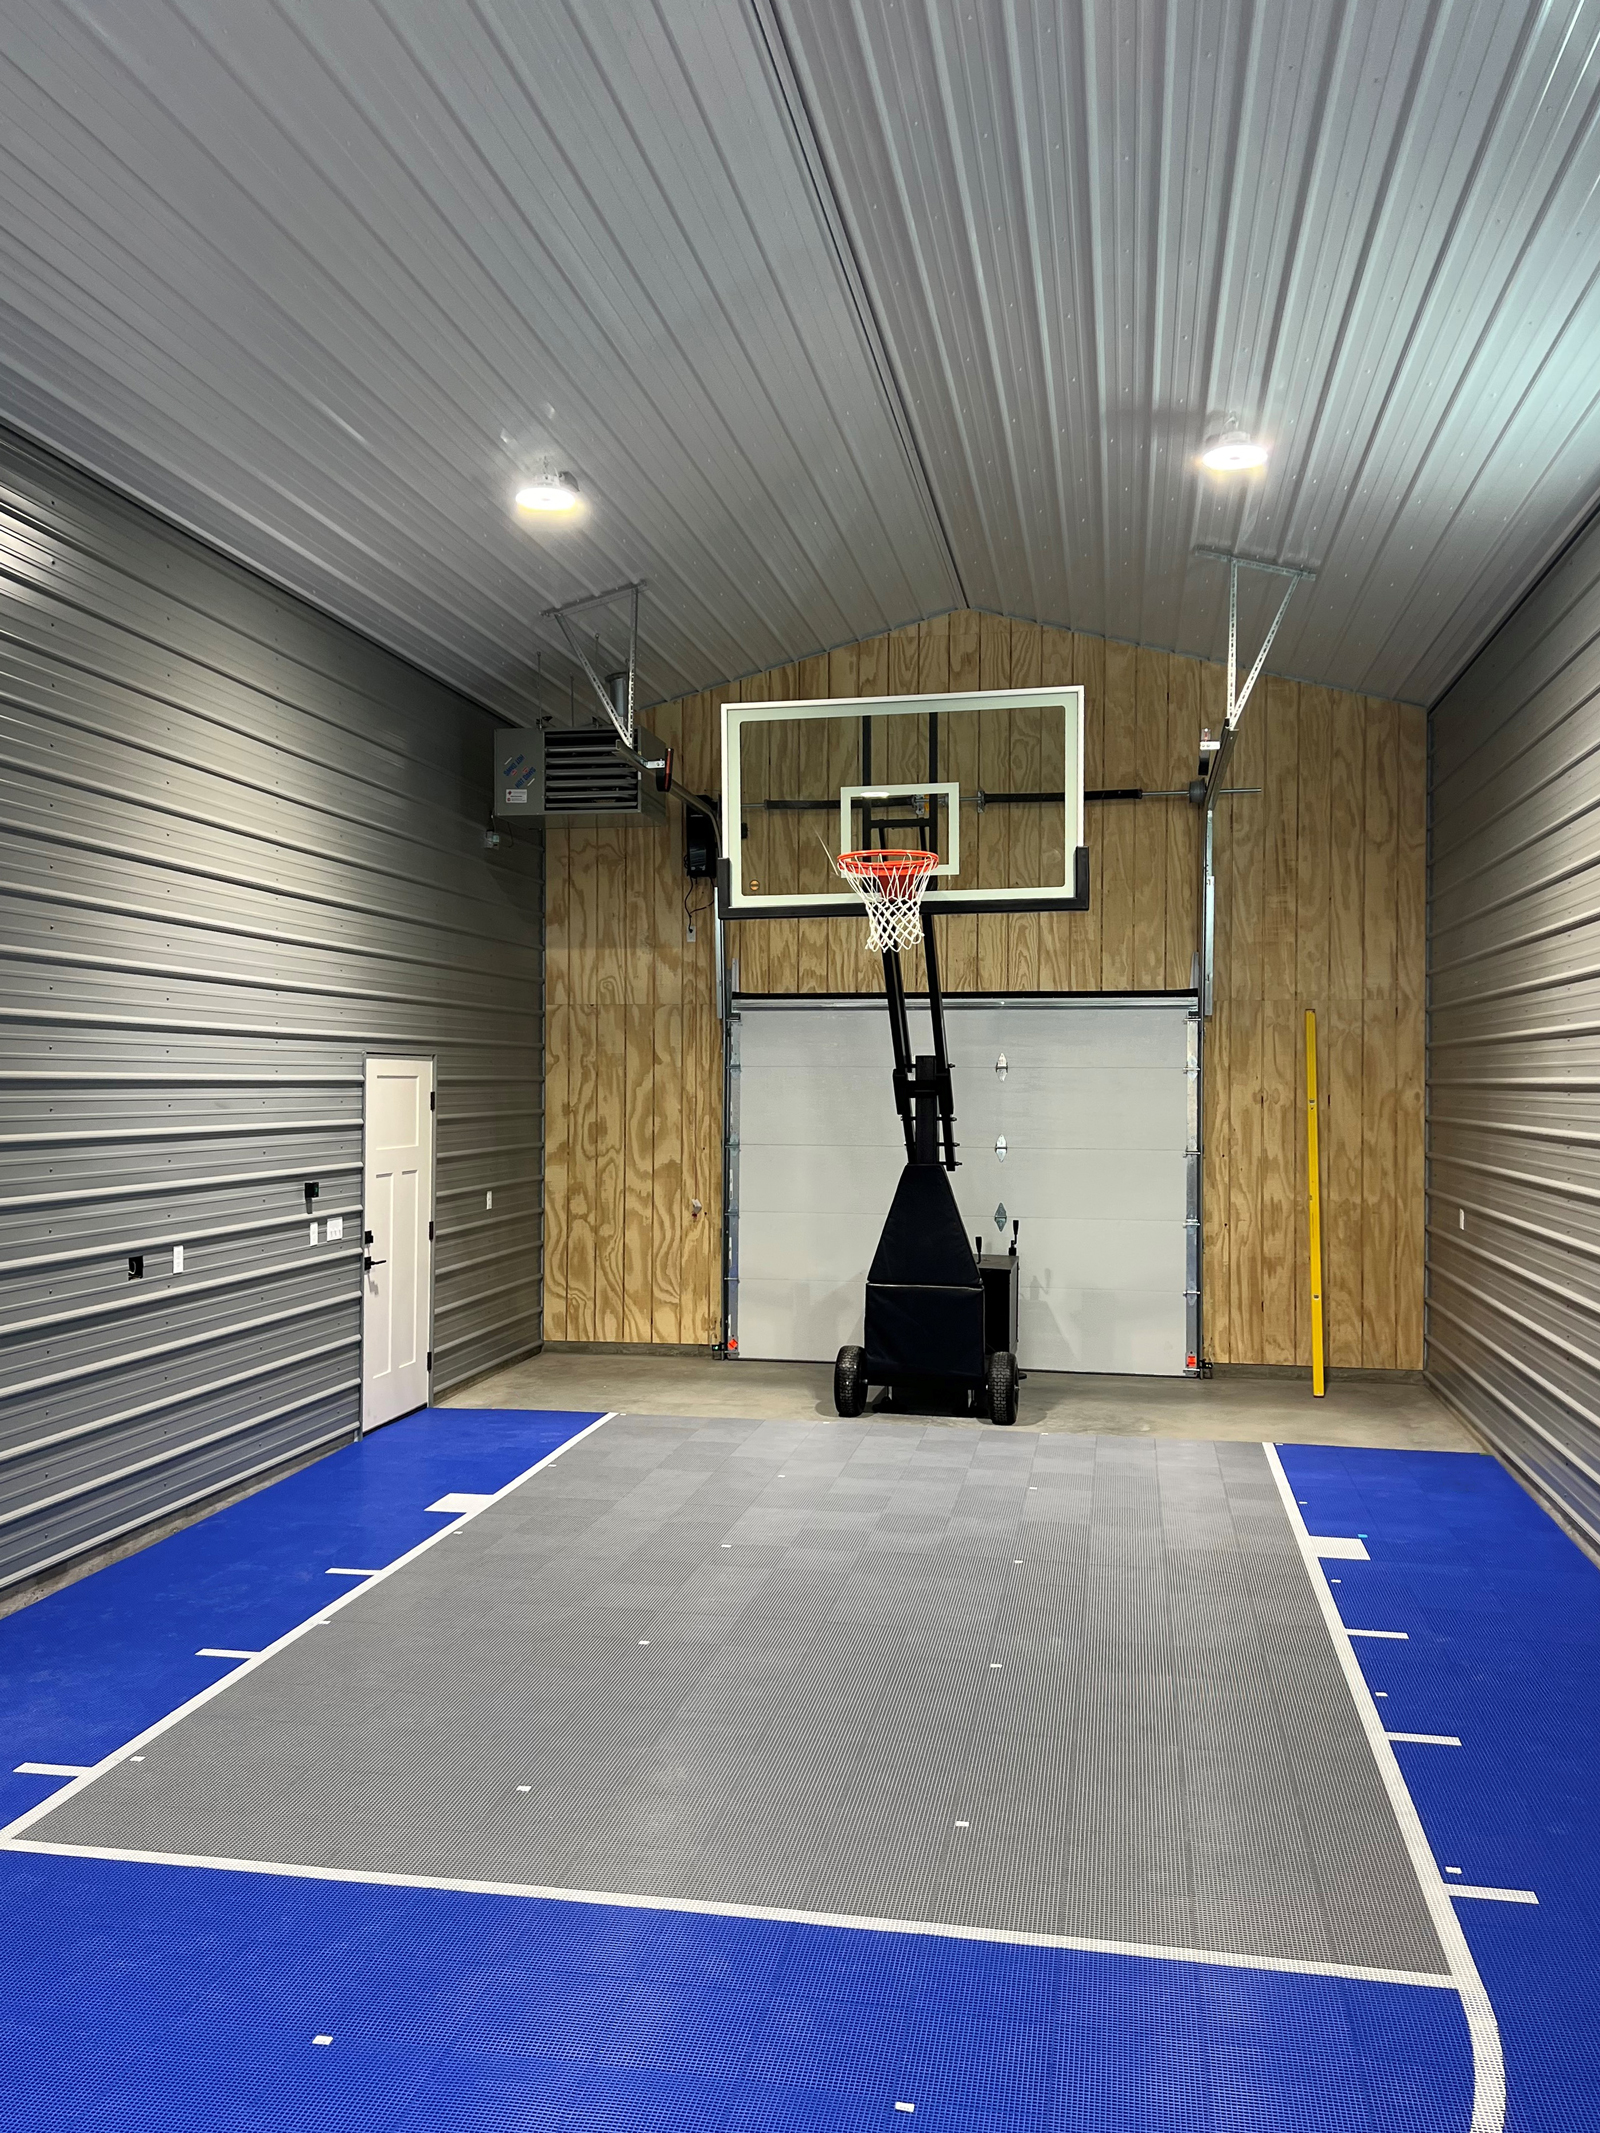 Indoor basketball court with blue and gray colors